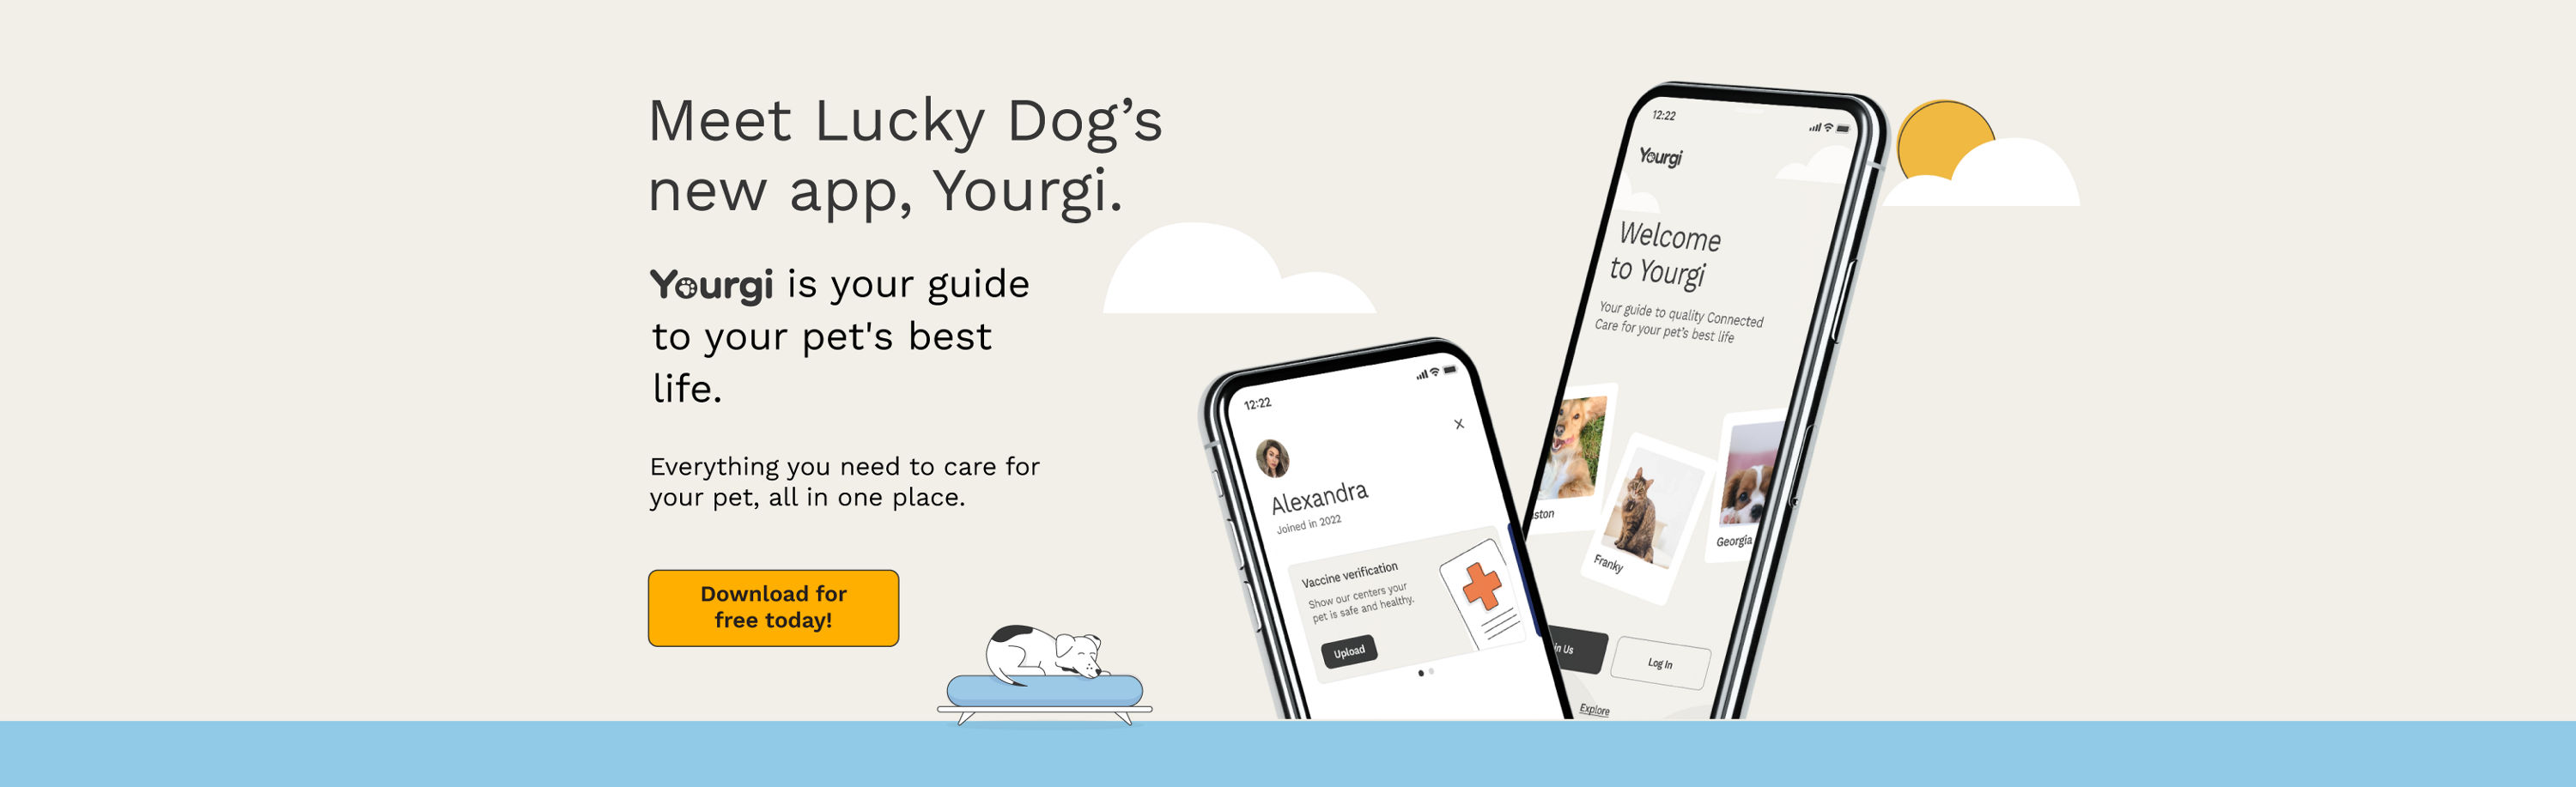 Meet Lucky Dog's new app, Yourgi.